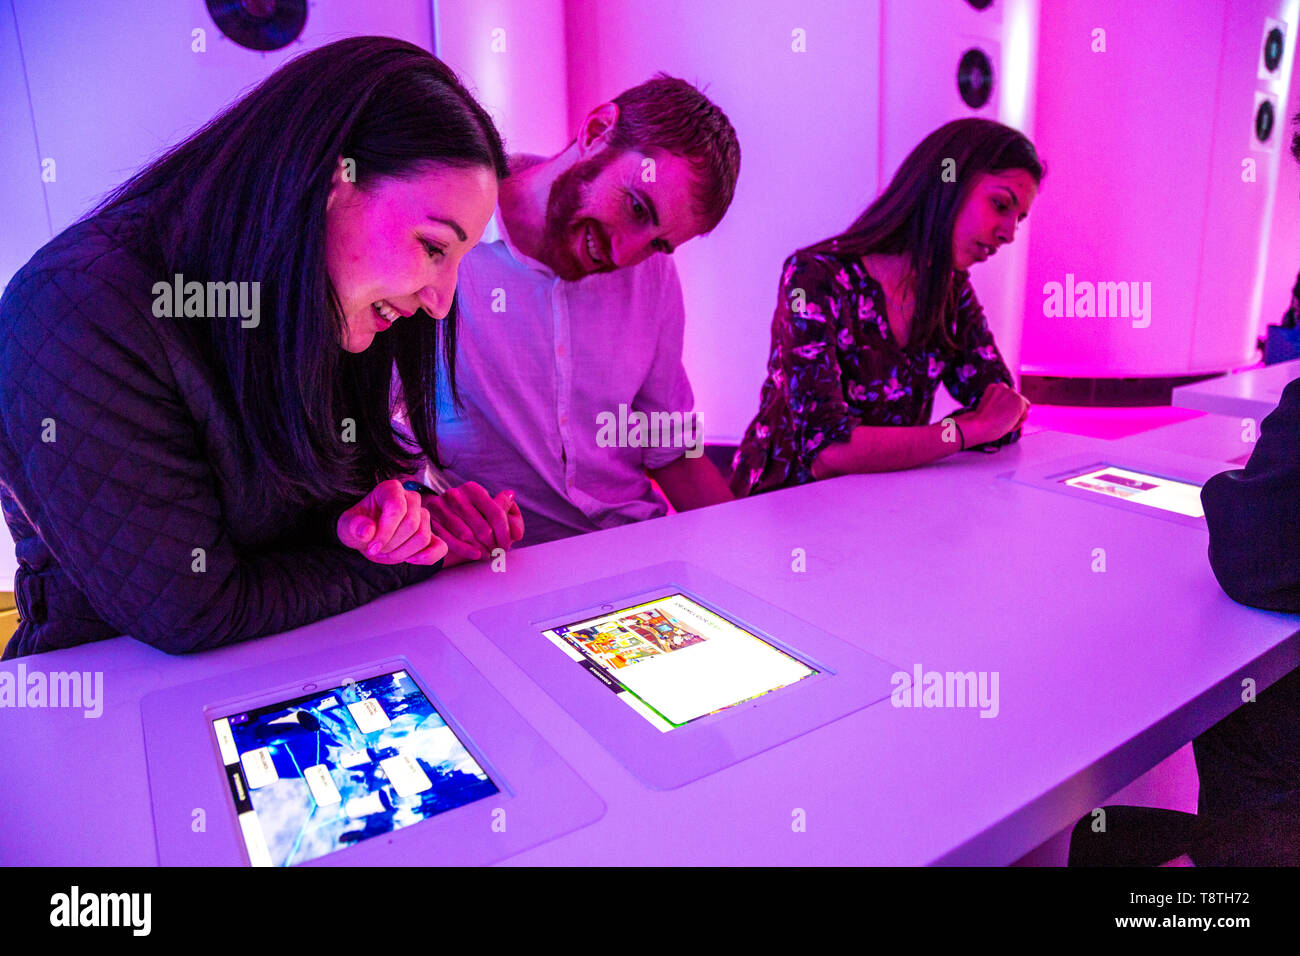 People playing VR games and ordering drinks on iPads embedded in the tables at Otherworld Virtual Reality Arcade and Bar, London, UK Stock Photo